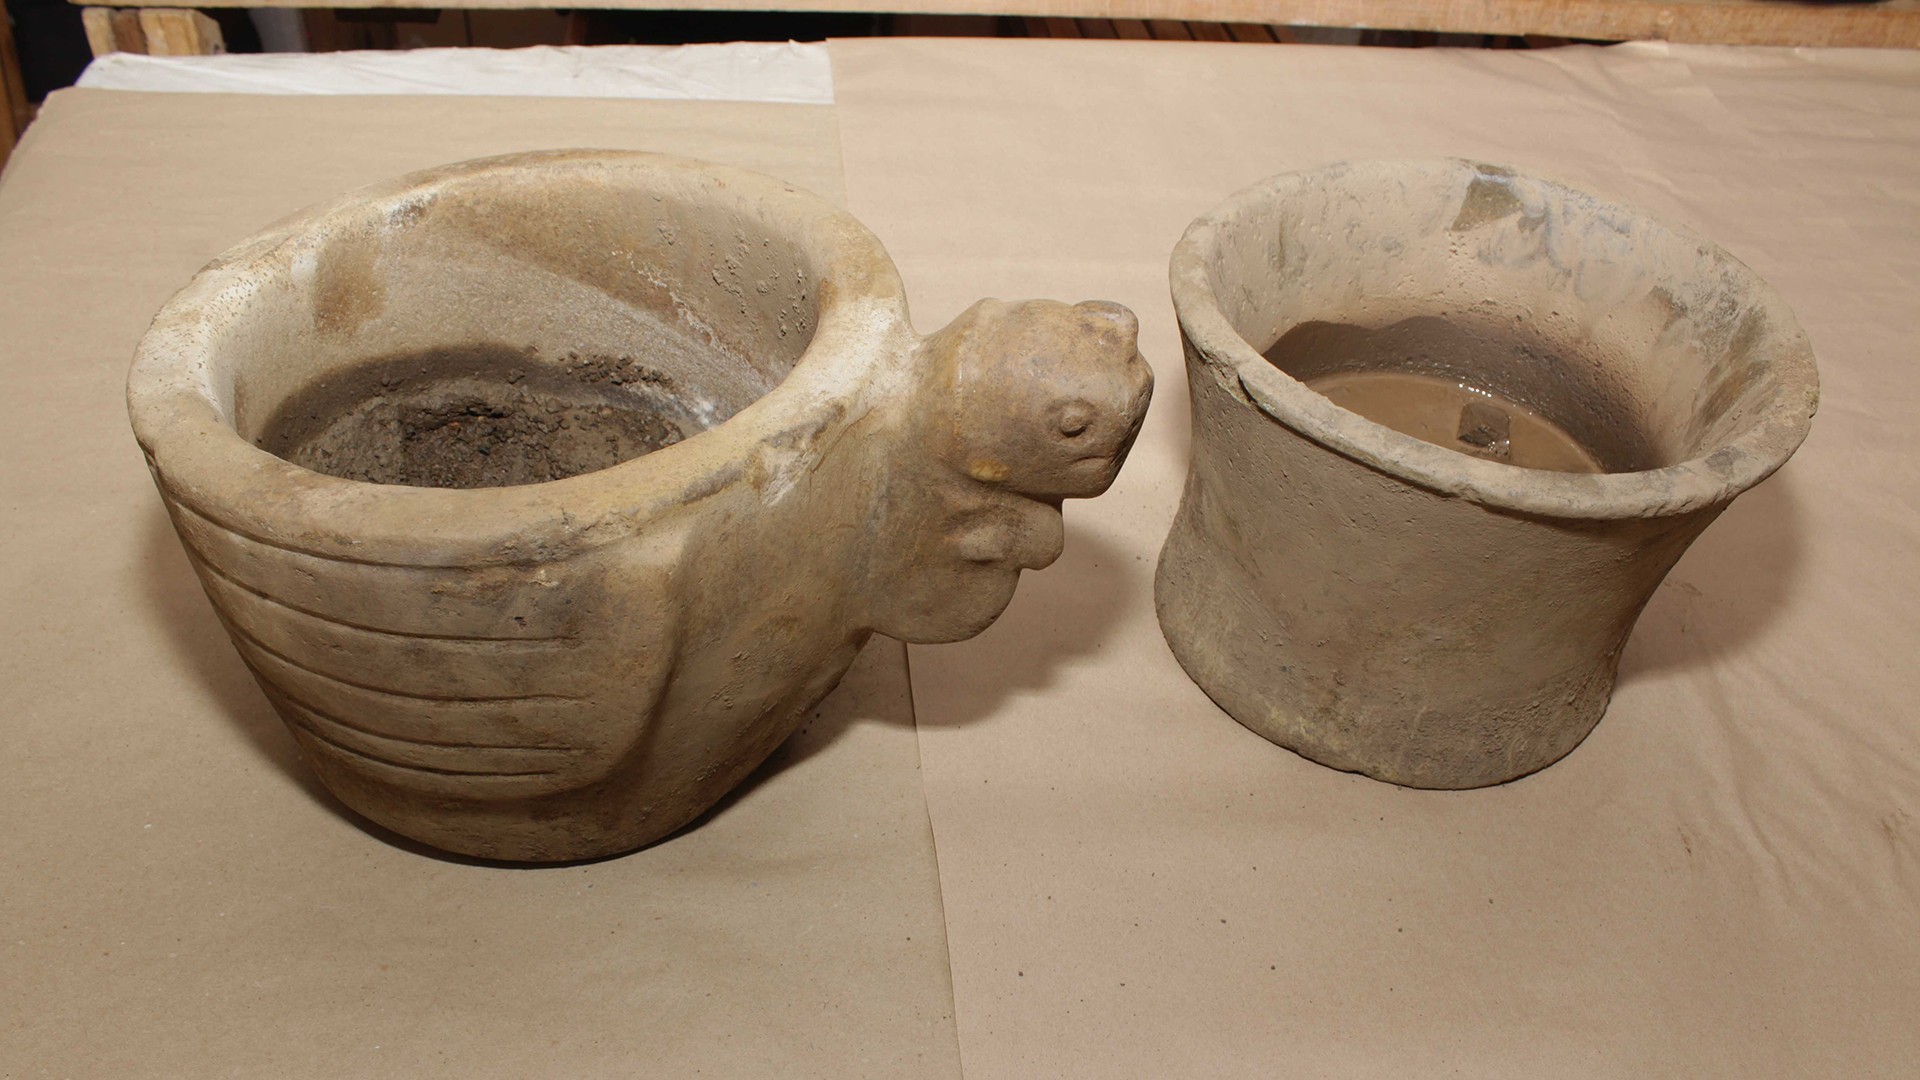 Two stone bowls, one of them decorated with the head and wings of an Andean condor, were found in a gallery within the hidden Chavín de Huántar temple complex.